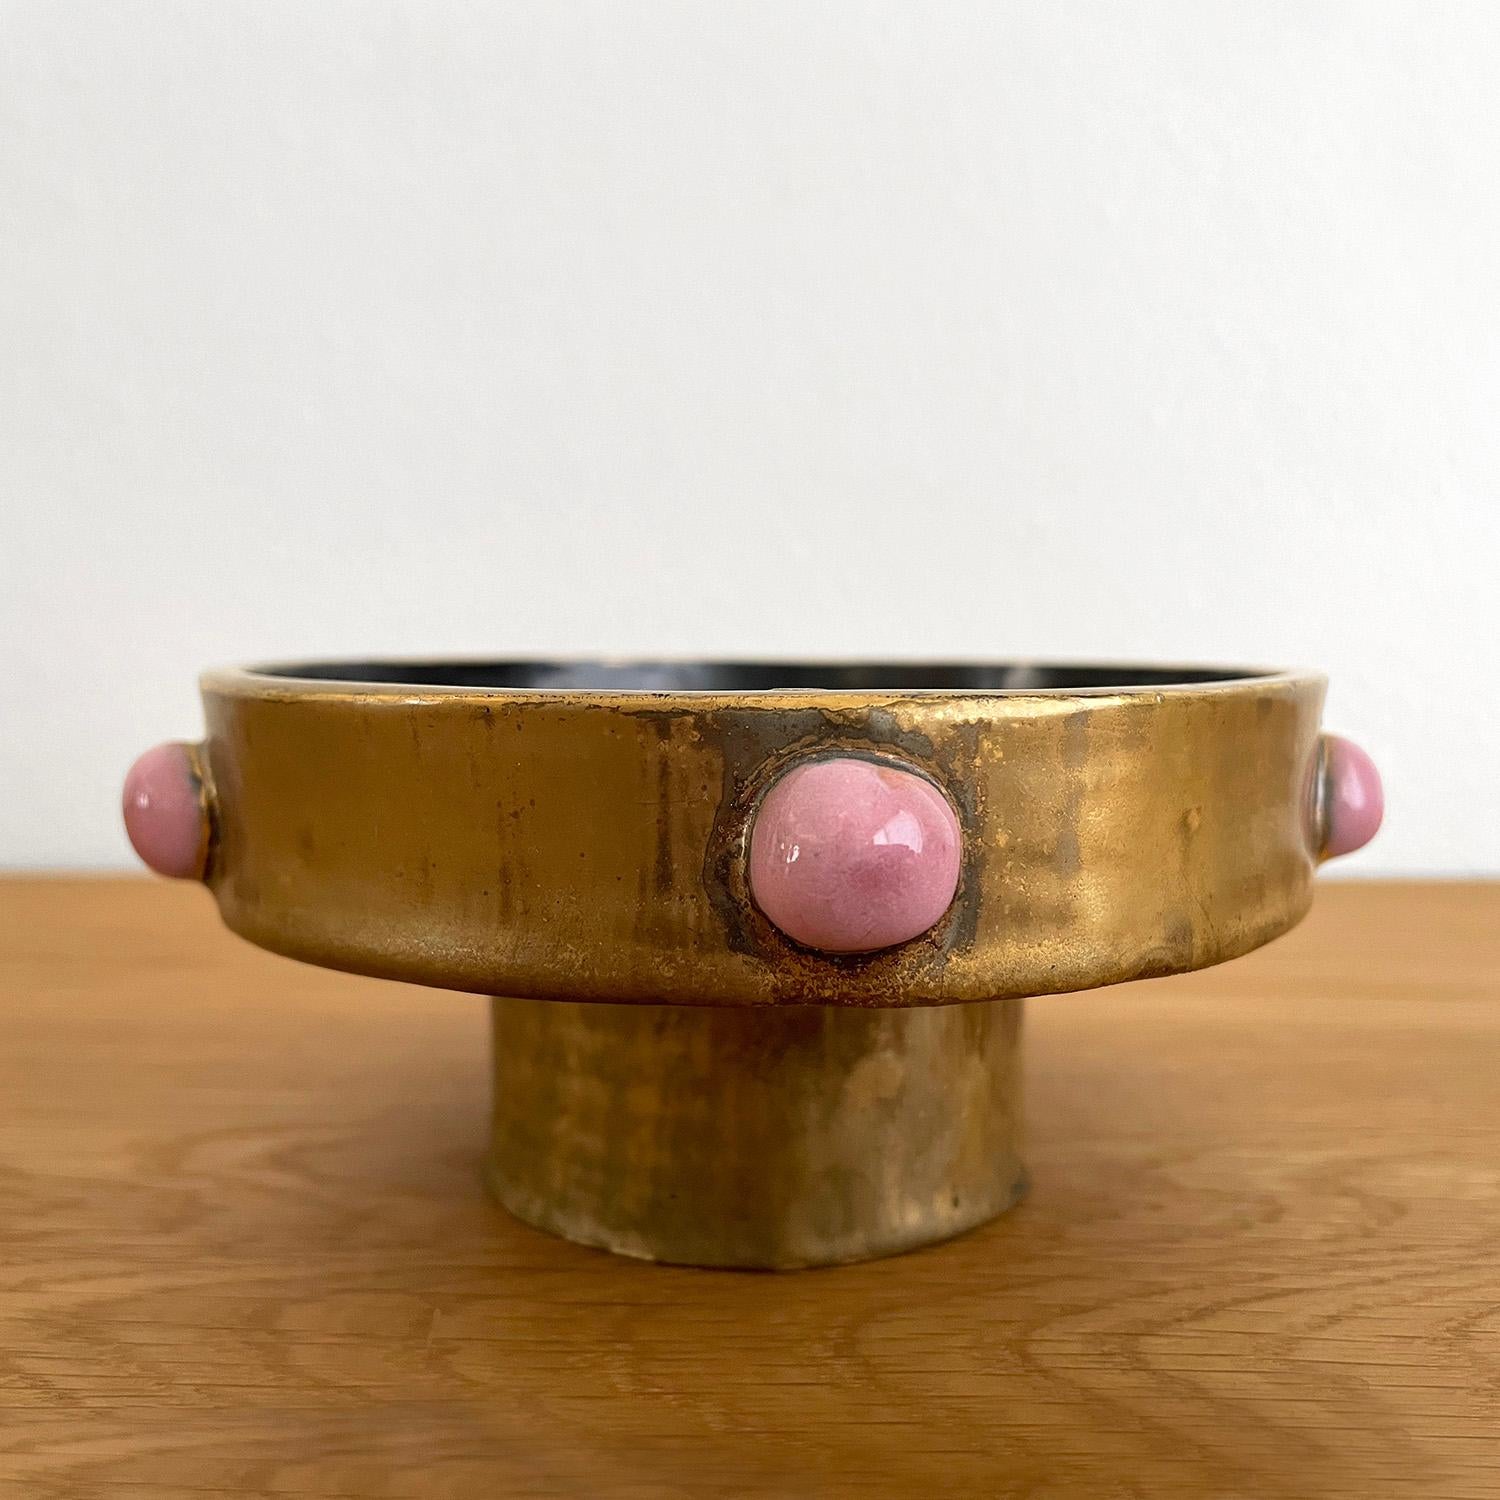 Francois Lembo ashtray or catch all 
France, circa 1960’s
Organic composition and feel 
Rich gold color with delicate pink enamel cabochon detail 
Wonderful patina
Can be used as a catch all or ashtray.